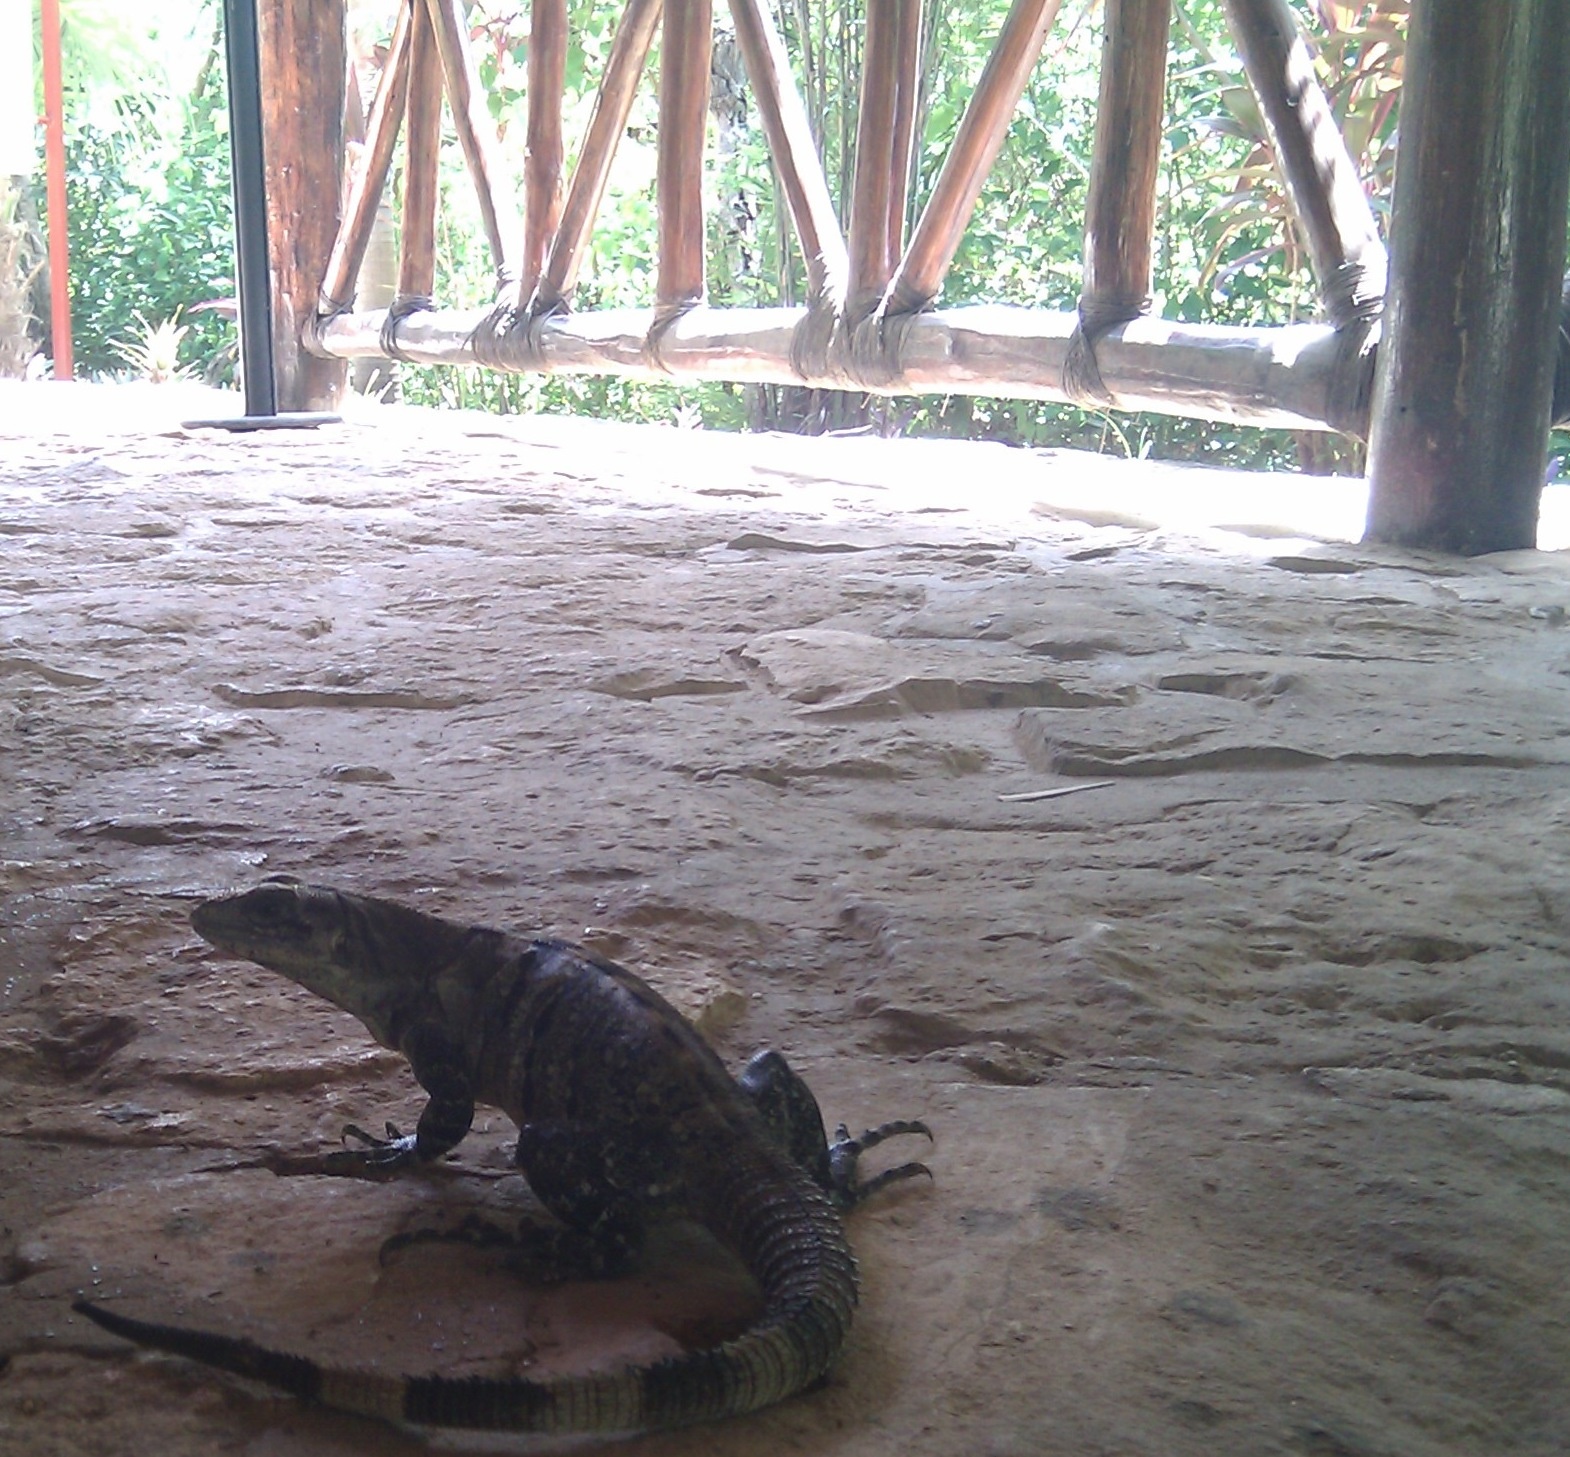 a lizard is sitting on the sand under a covered area